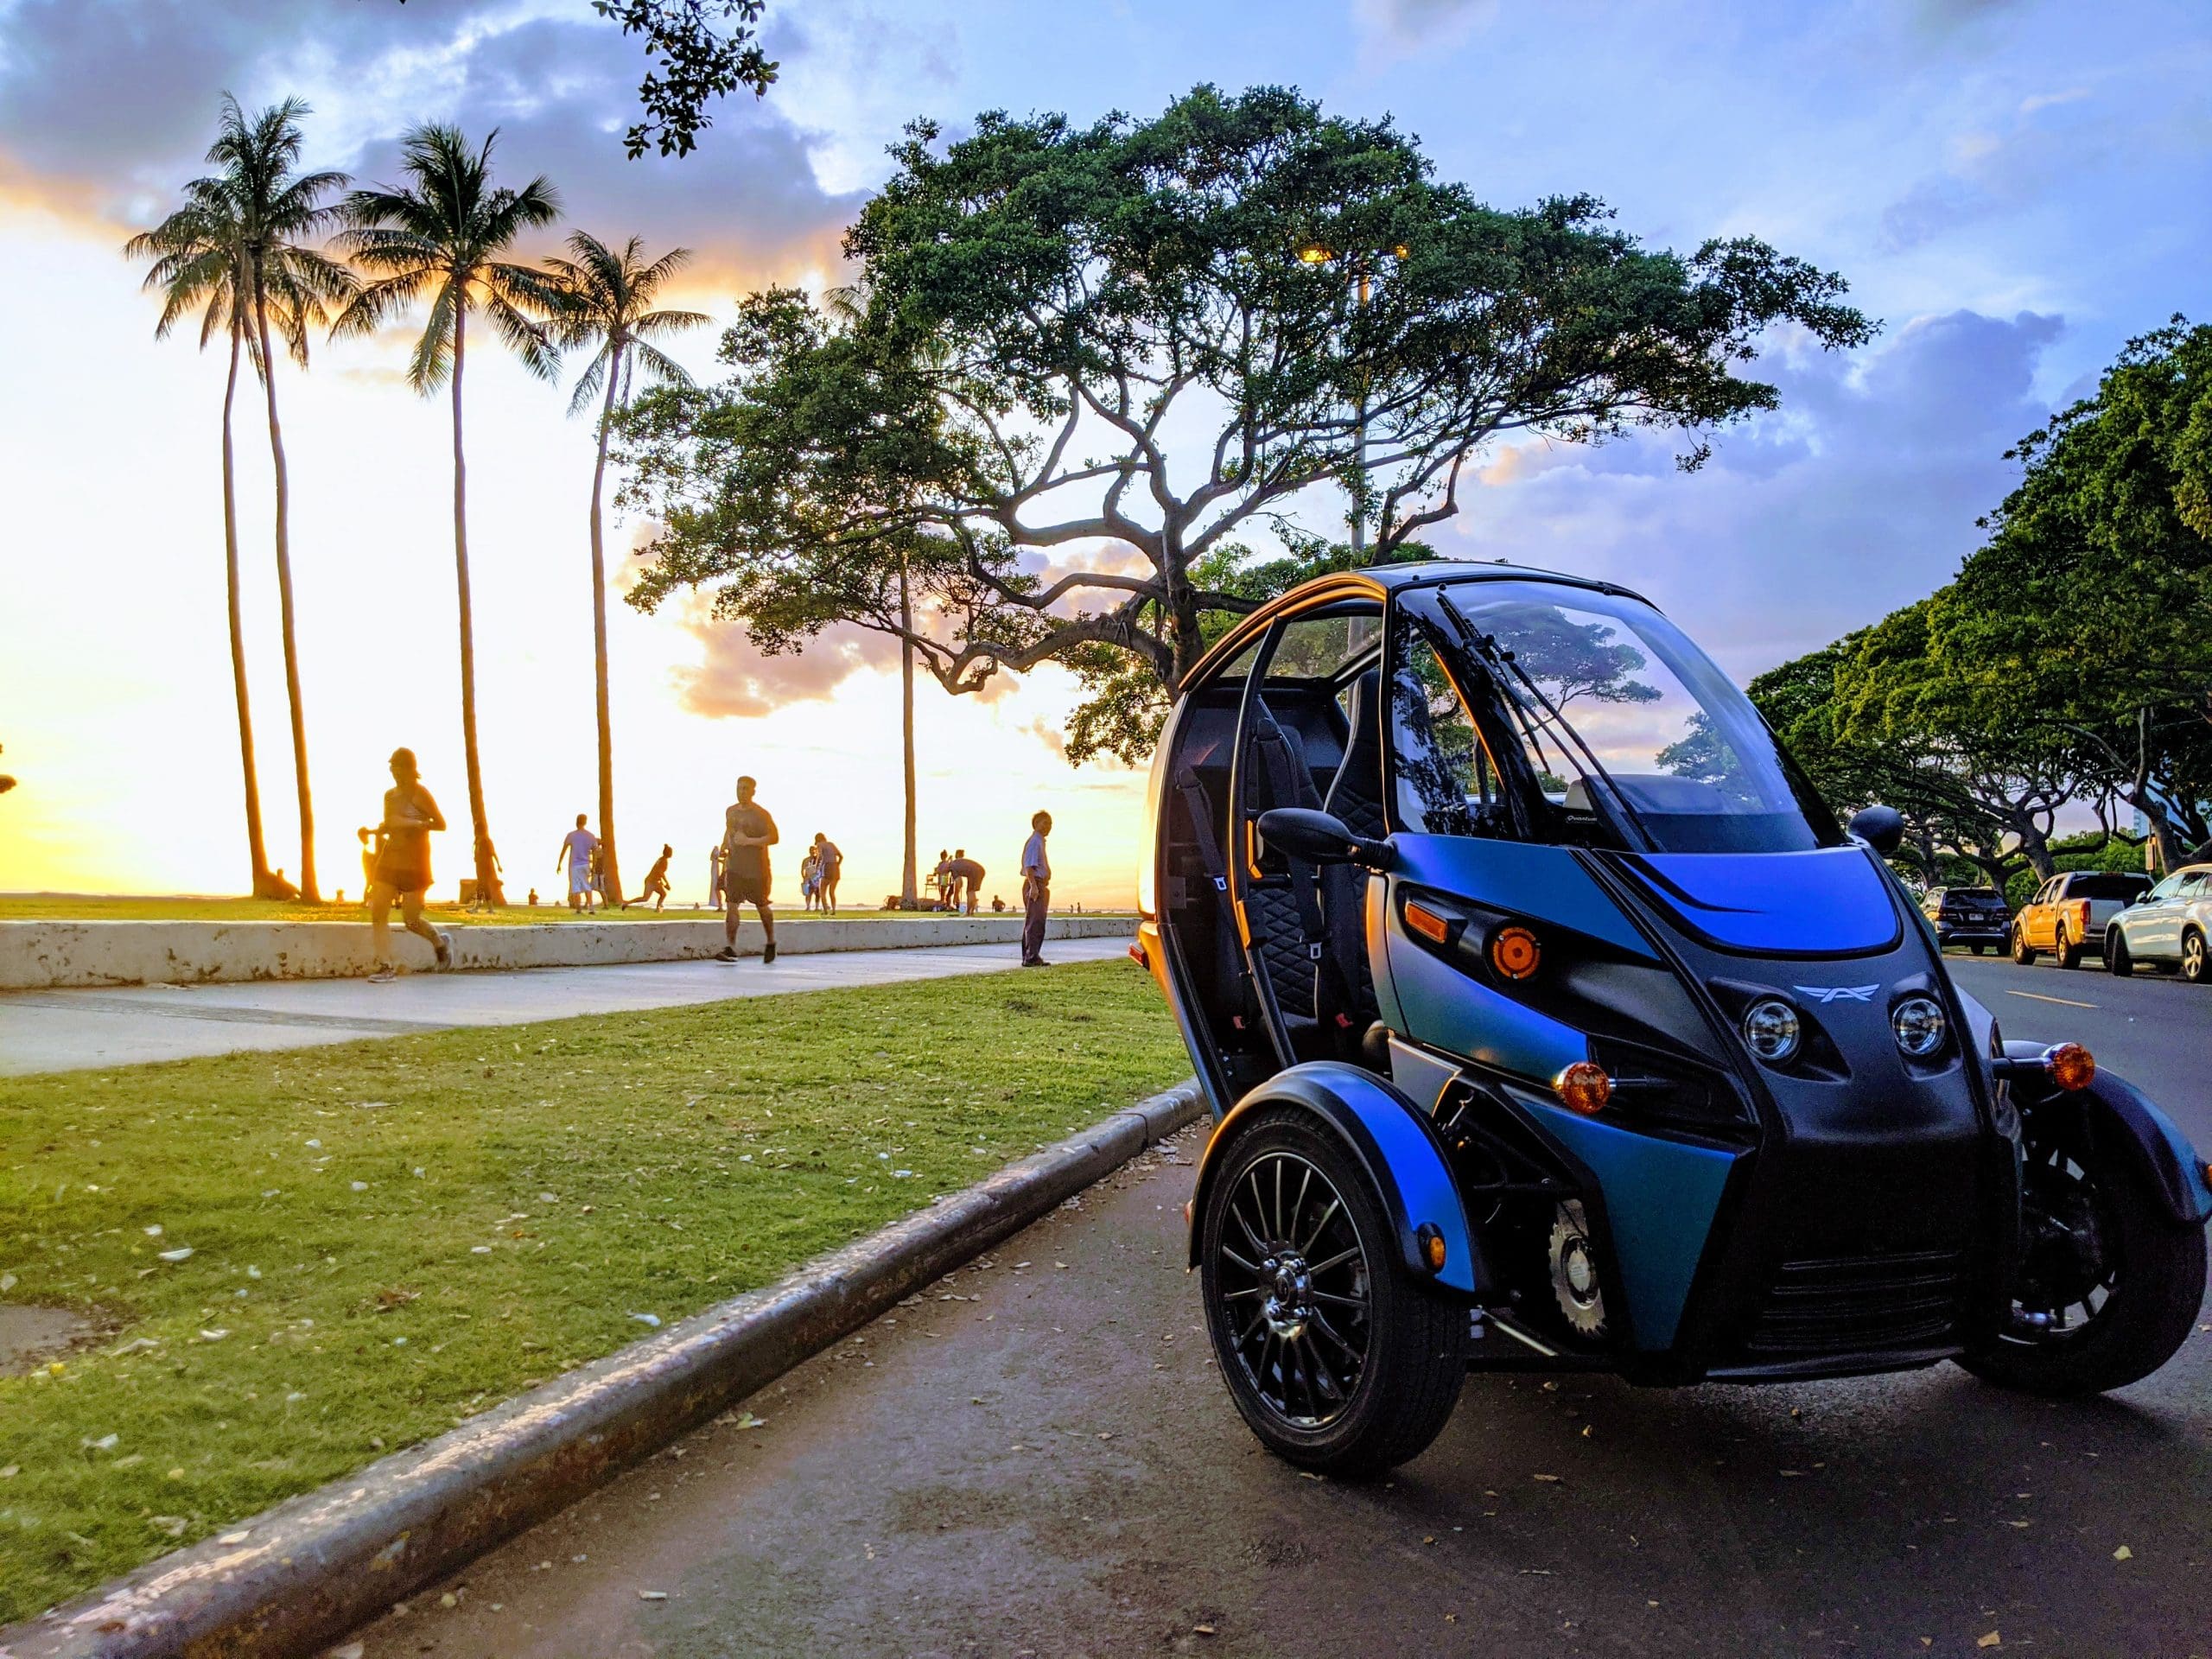 Arcimoto vehicles and the relevant lineup